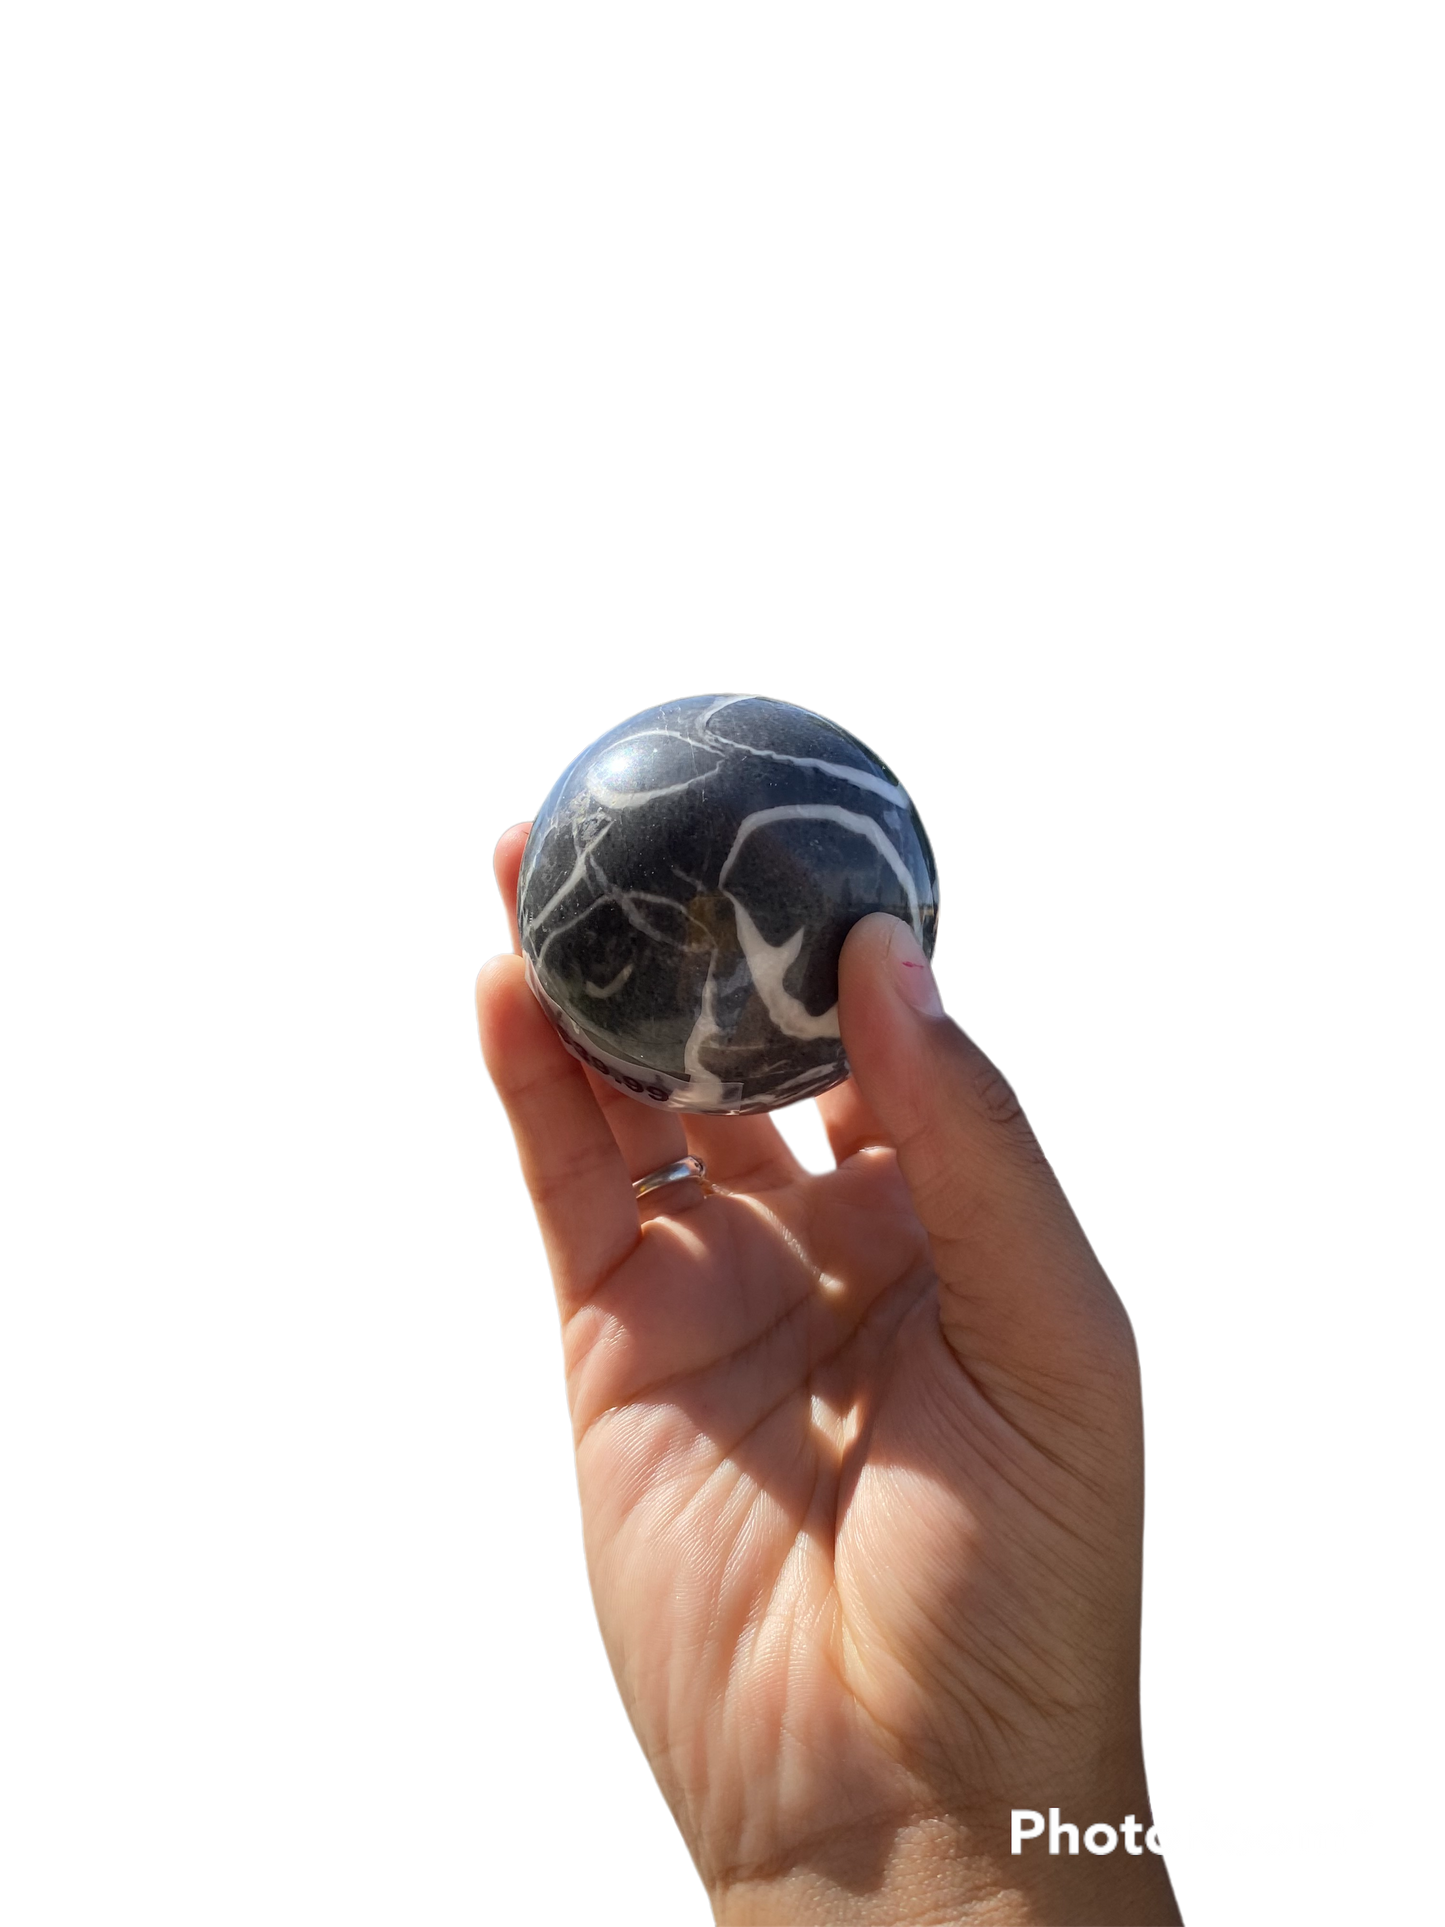 Shell Jasper Sphere with stand